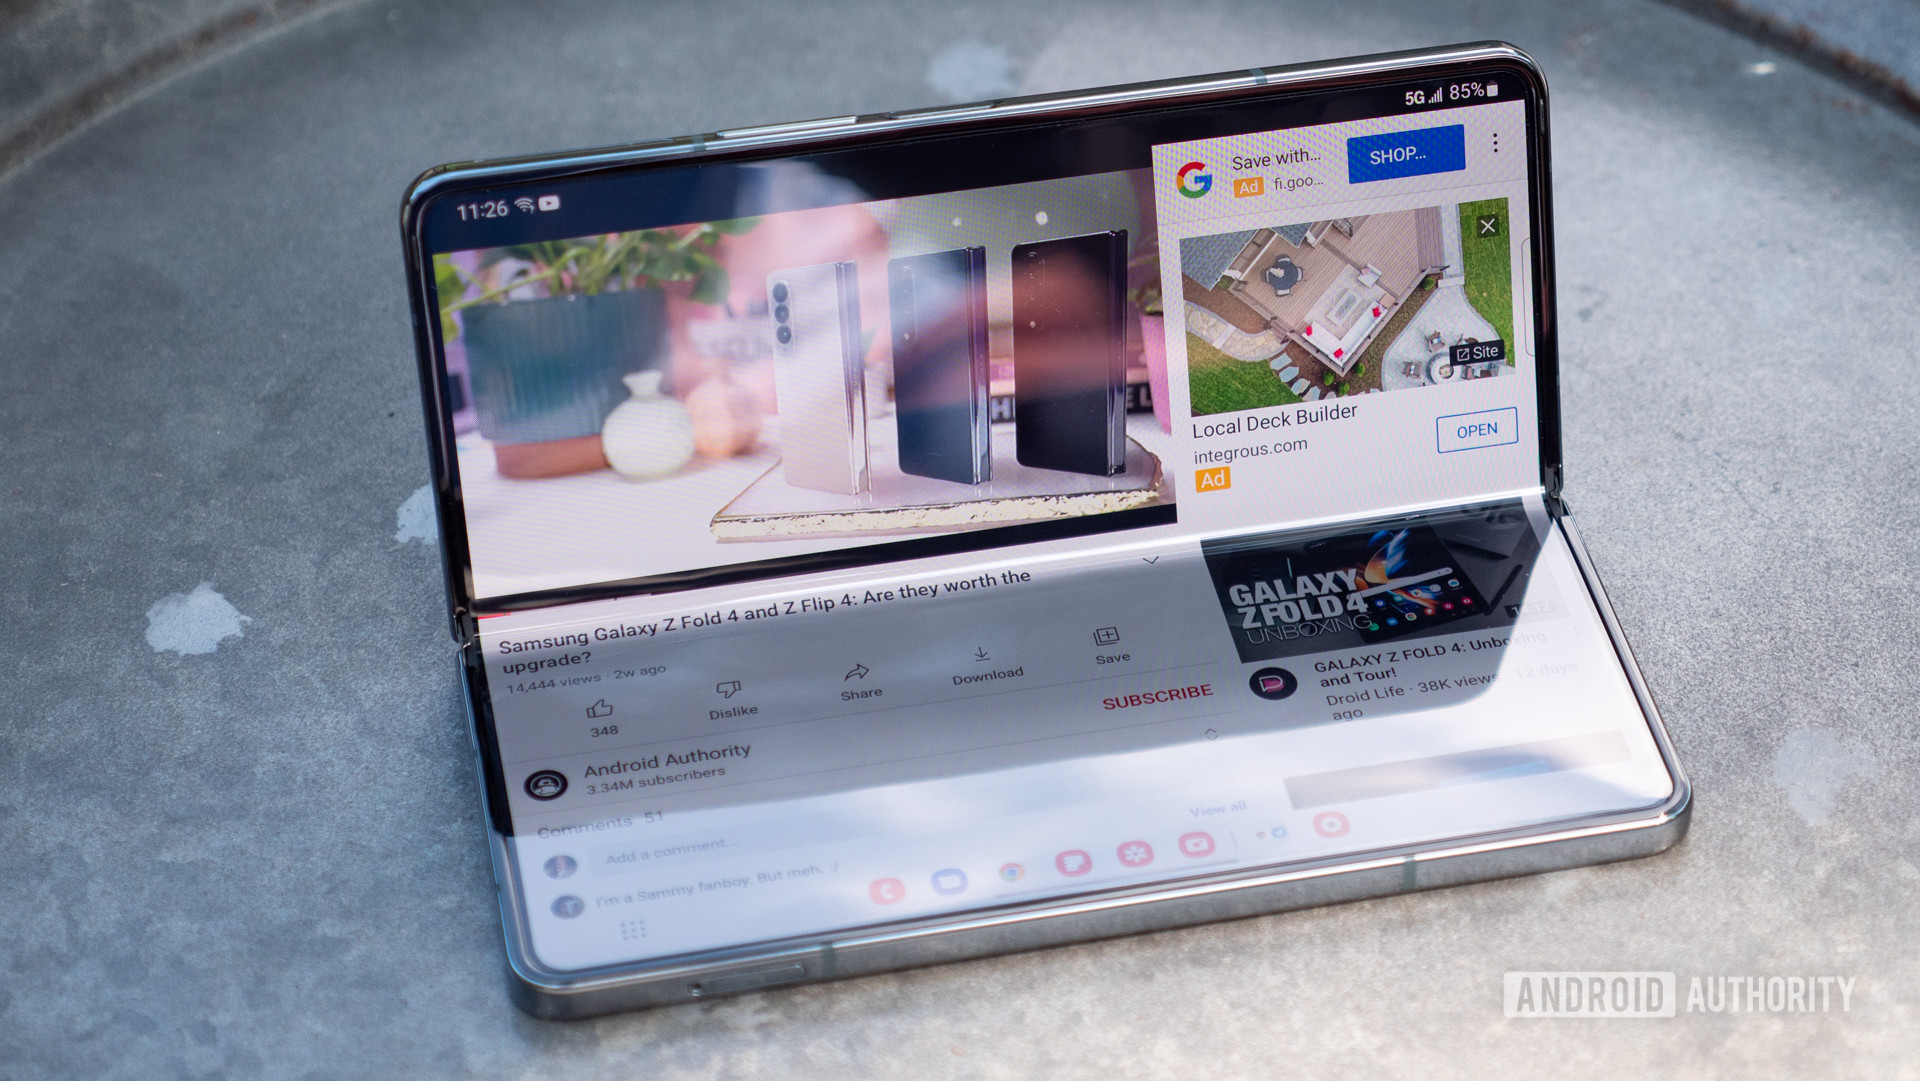 YouTube has been on a monetization push recently, as it began blocking ad-blockers and pushing users to buy YouTube Premium. That move makes sense in